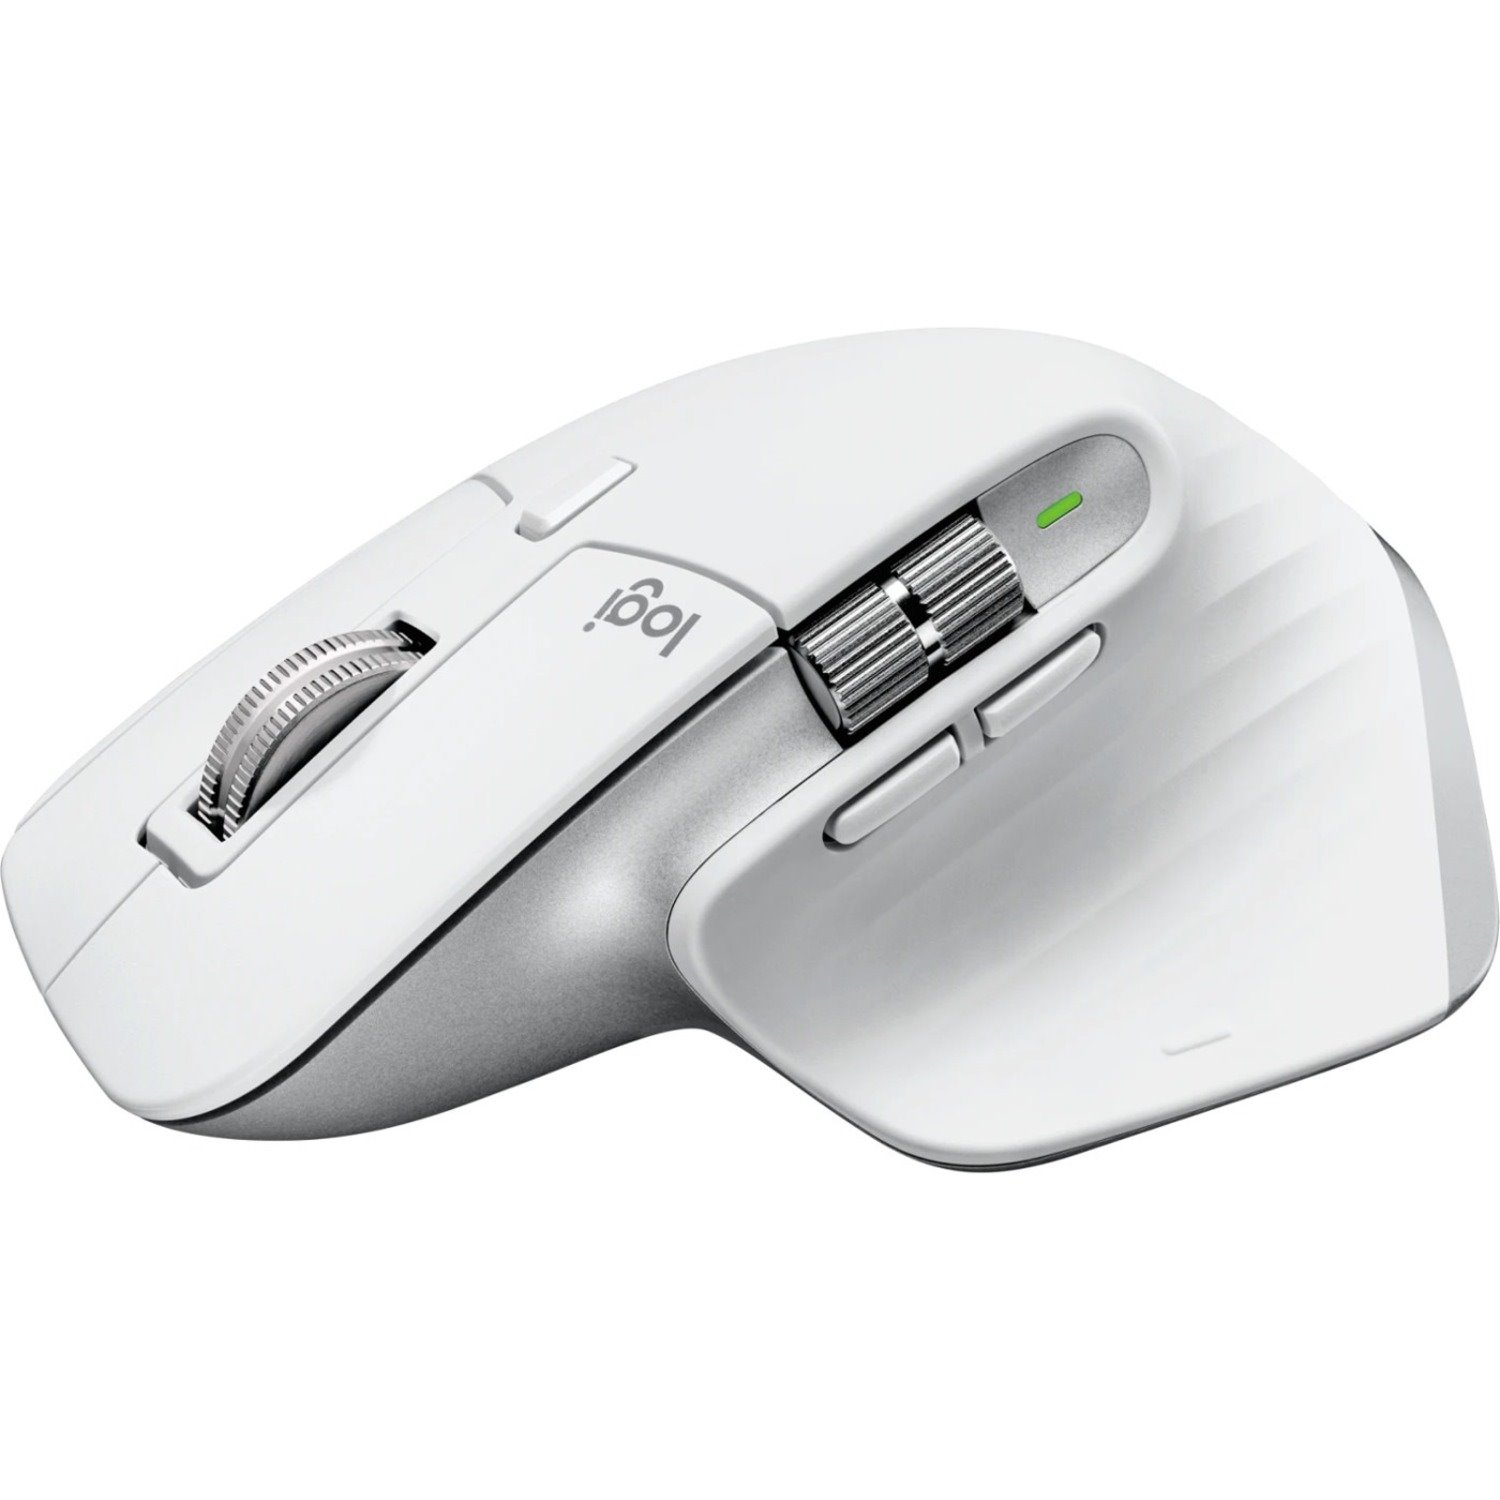 Logitech MX MASTER 3S Mouse - Bluetooth/Radio Frequency - USB Type C - Darkfield - 7 Button(s) - Pale Gray